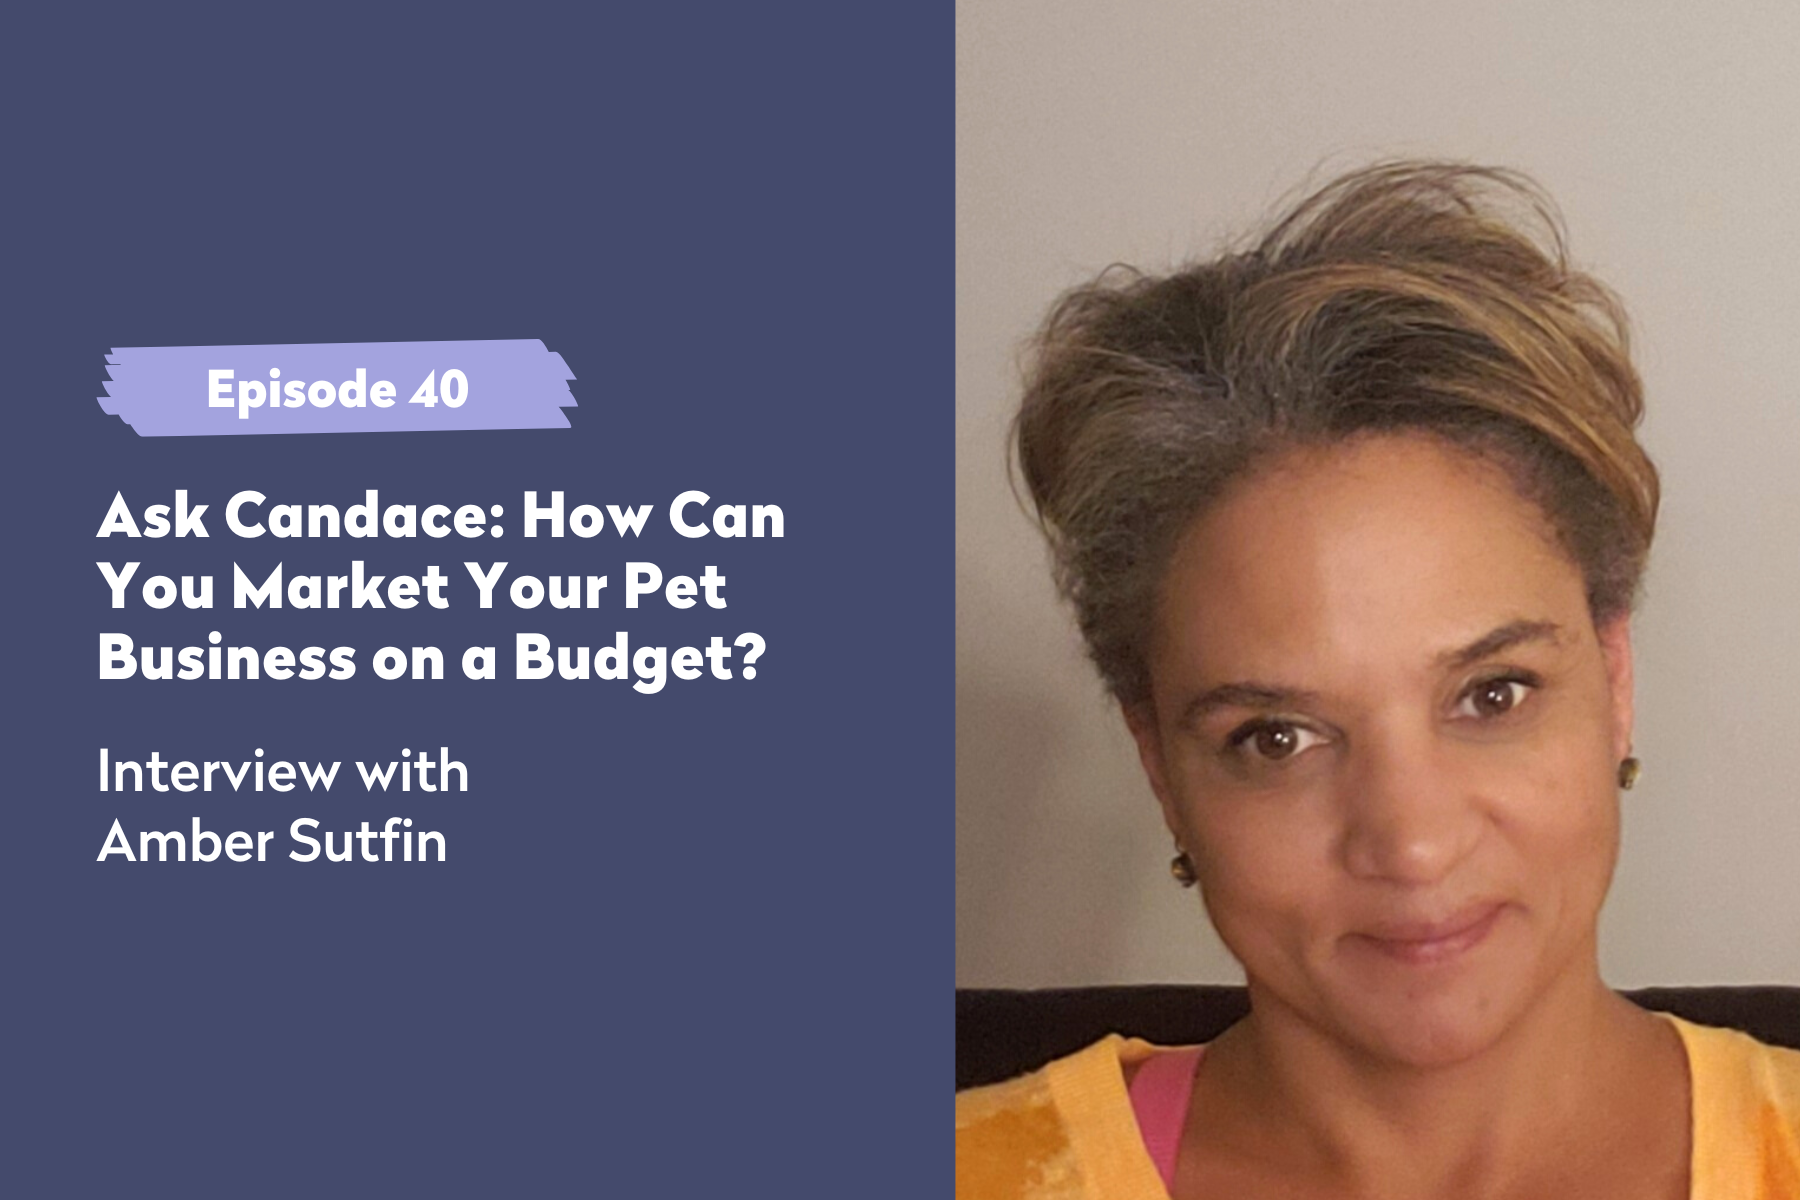 Episode 40 | Ask Candace: How Can You Market Your Pet Business on a Budget?